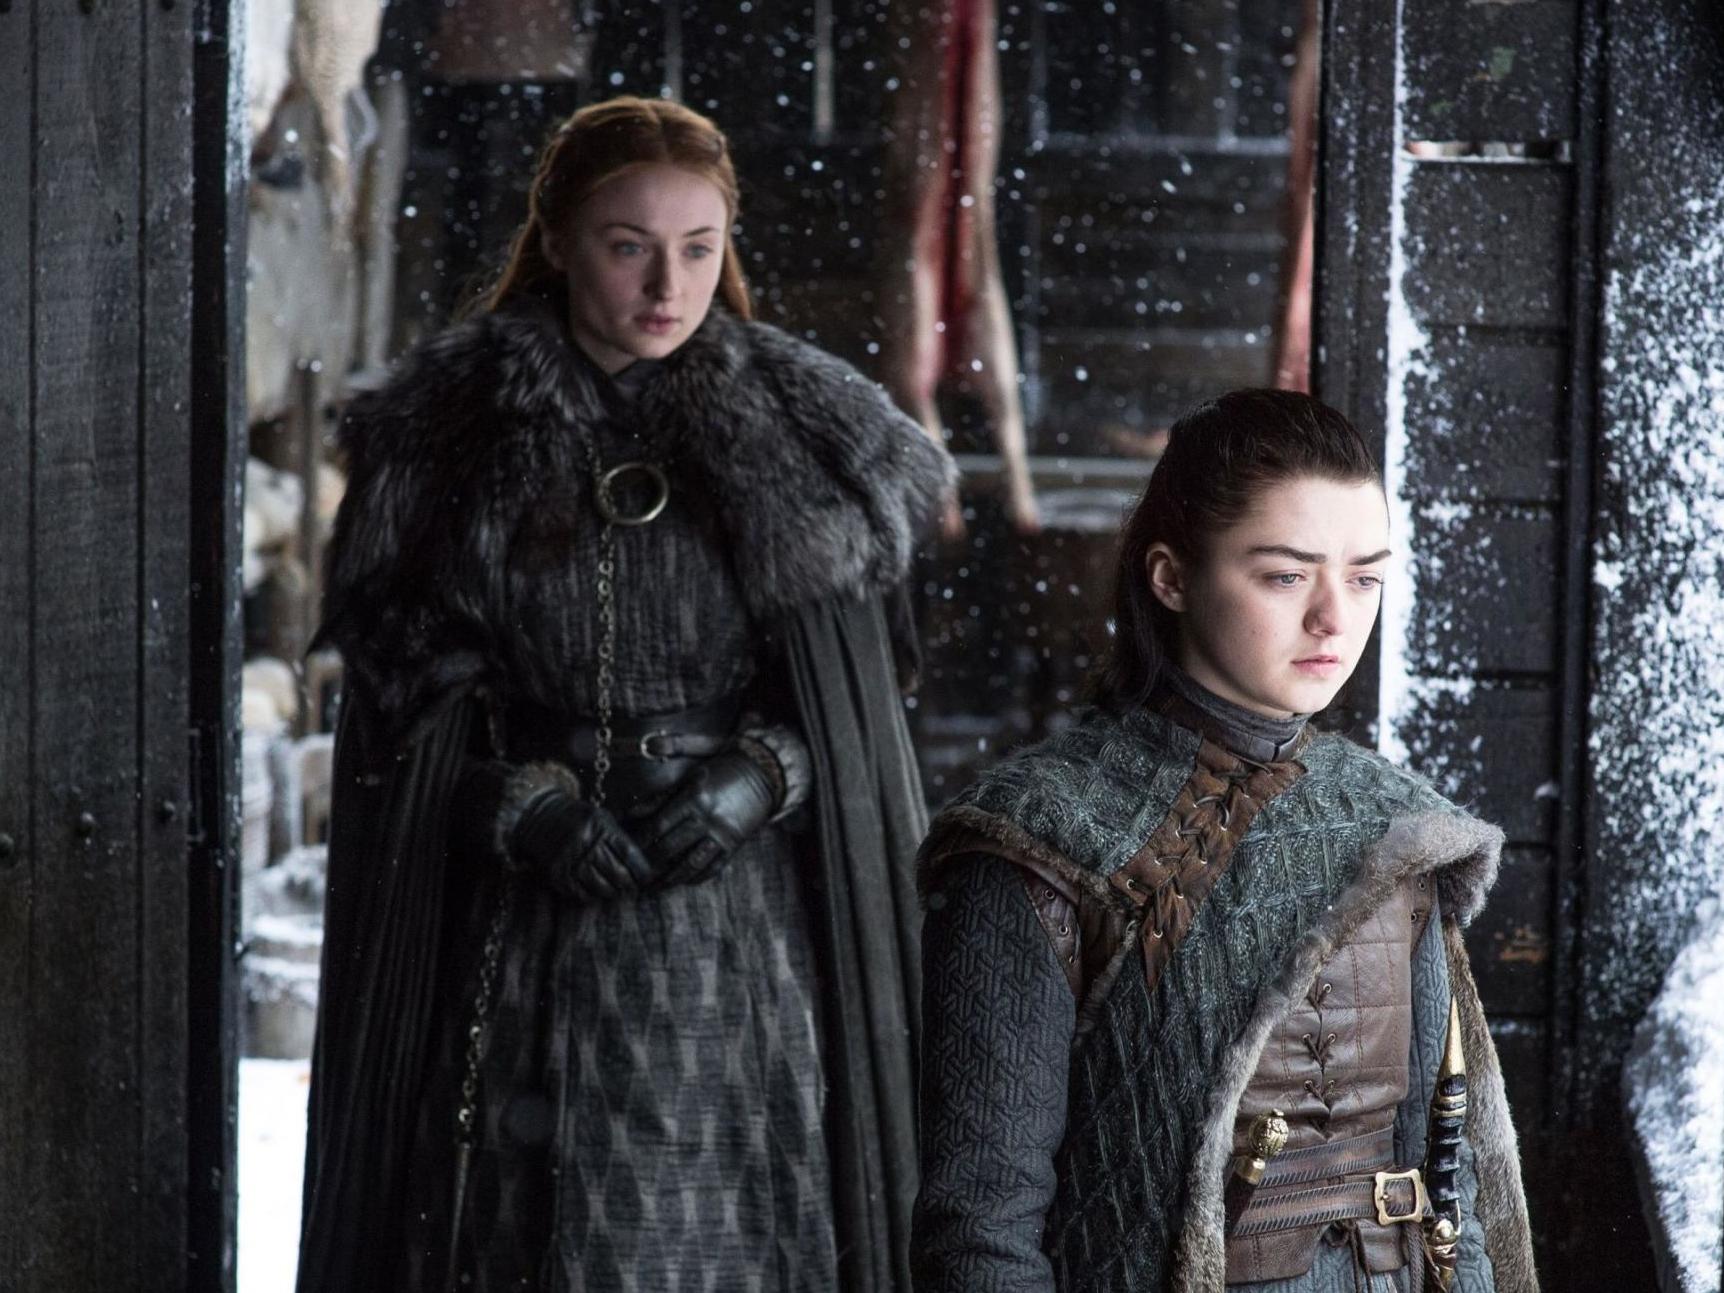 Sophie Turner and Maisie Williams in ‘Game Of Thrones’